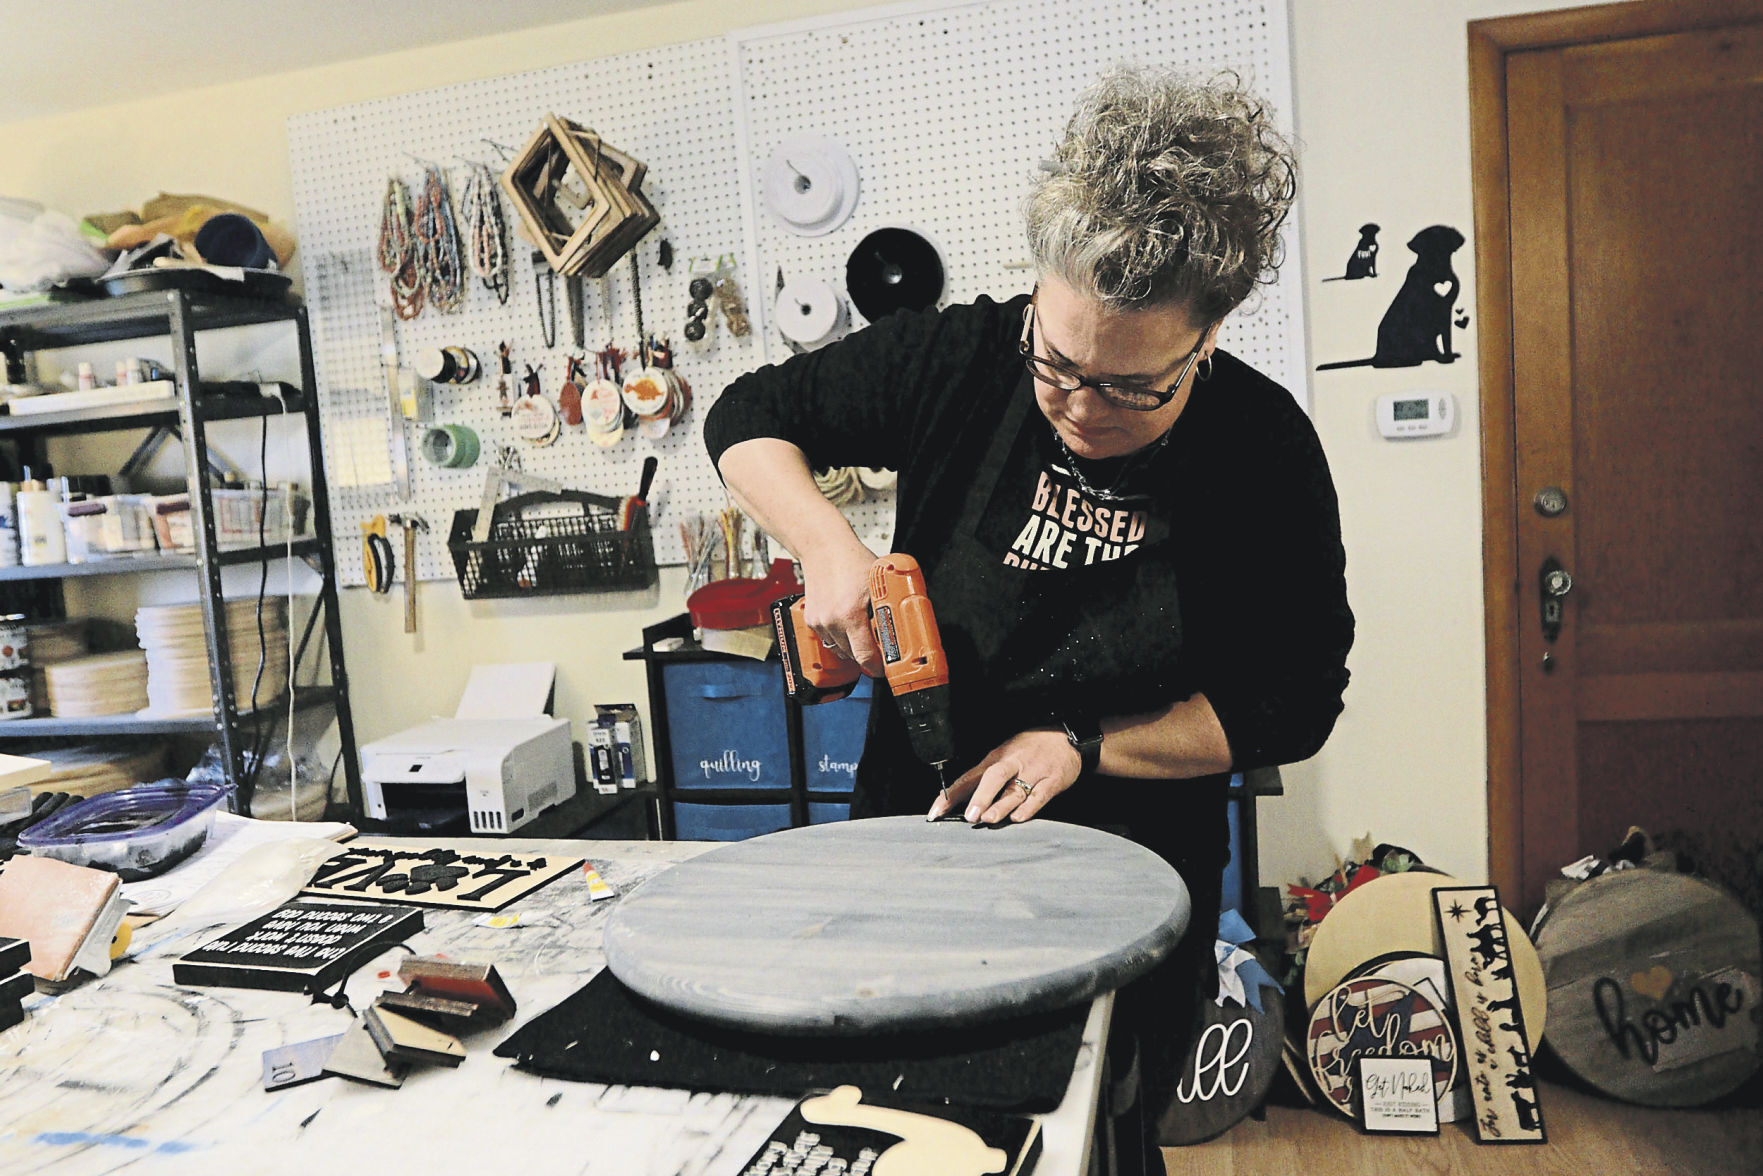 Owner Amy O’Rourke puts together wooden signs at Bead and Board. The Dubuque business offers home decorations and jewelry. PHOTO CREDIT: Katie Goodale